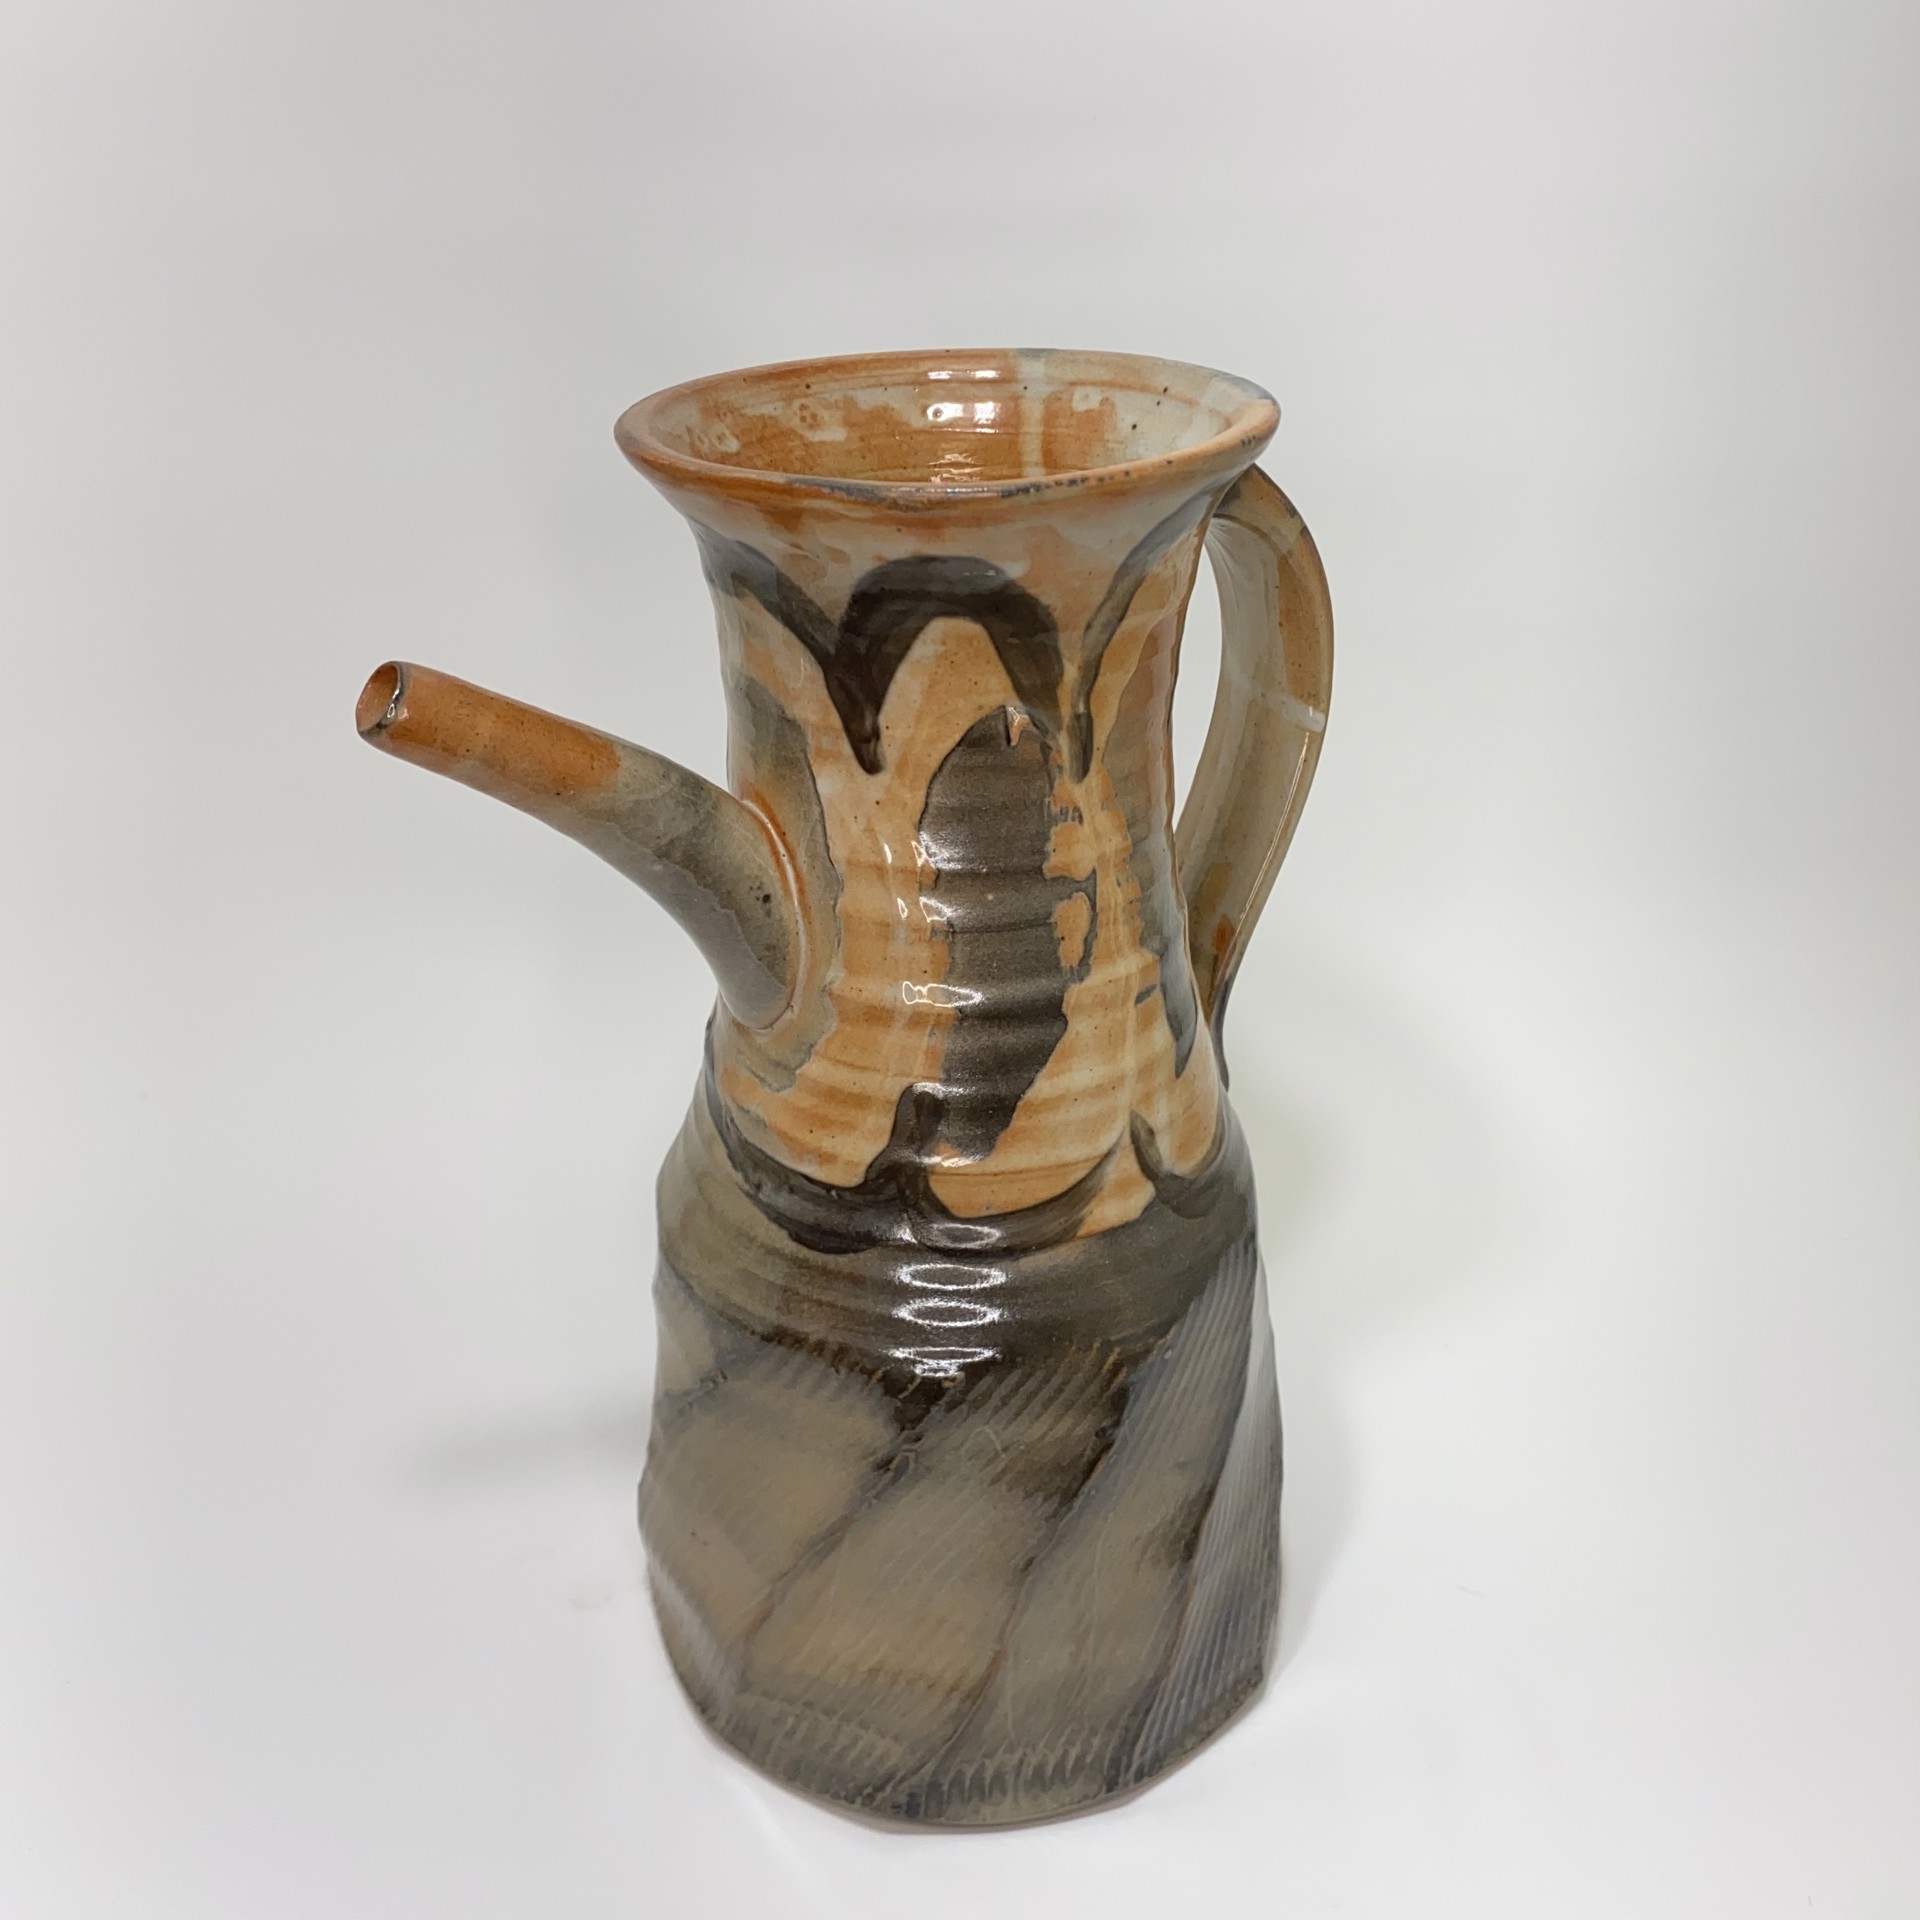 "Faceted Pitcher #2" by William Hershey circa 2003 by Art One Resale Inventory